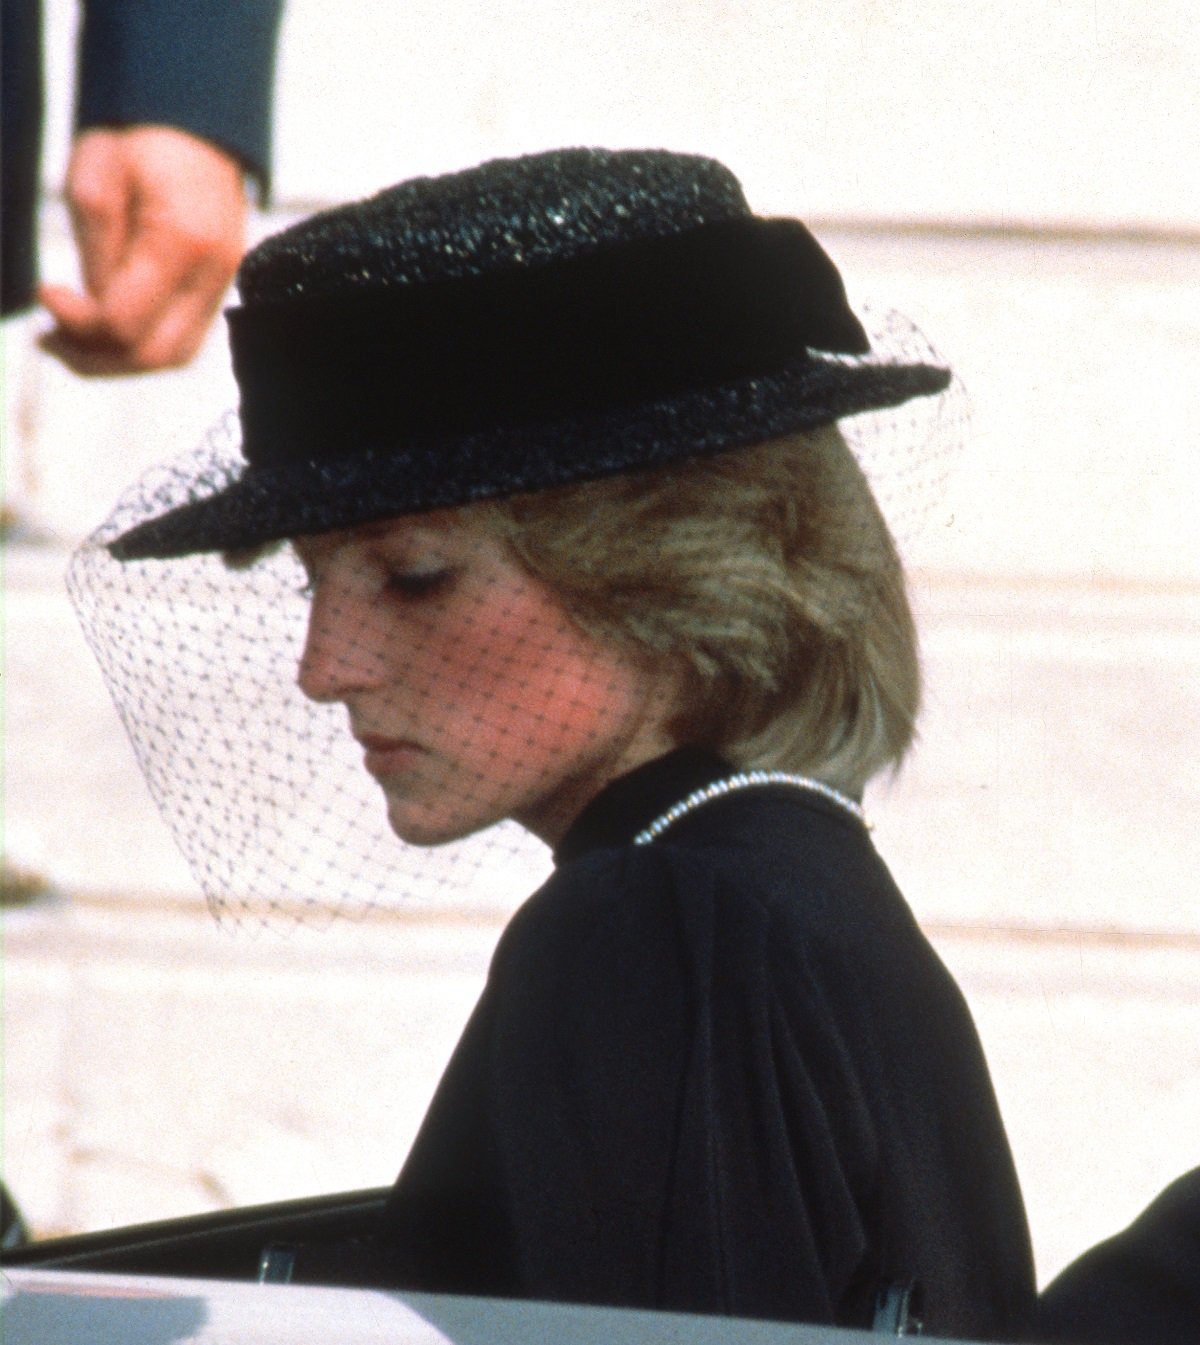 Princess Diana, whose funeral was attended by A-list celebrities, at Grace Kelly, the Princess of Monaco's funeral